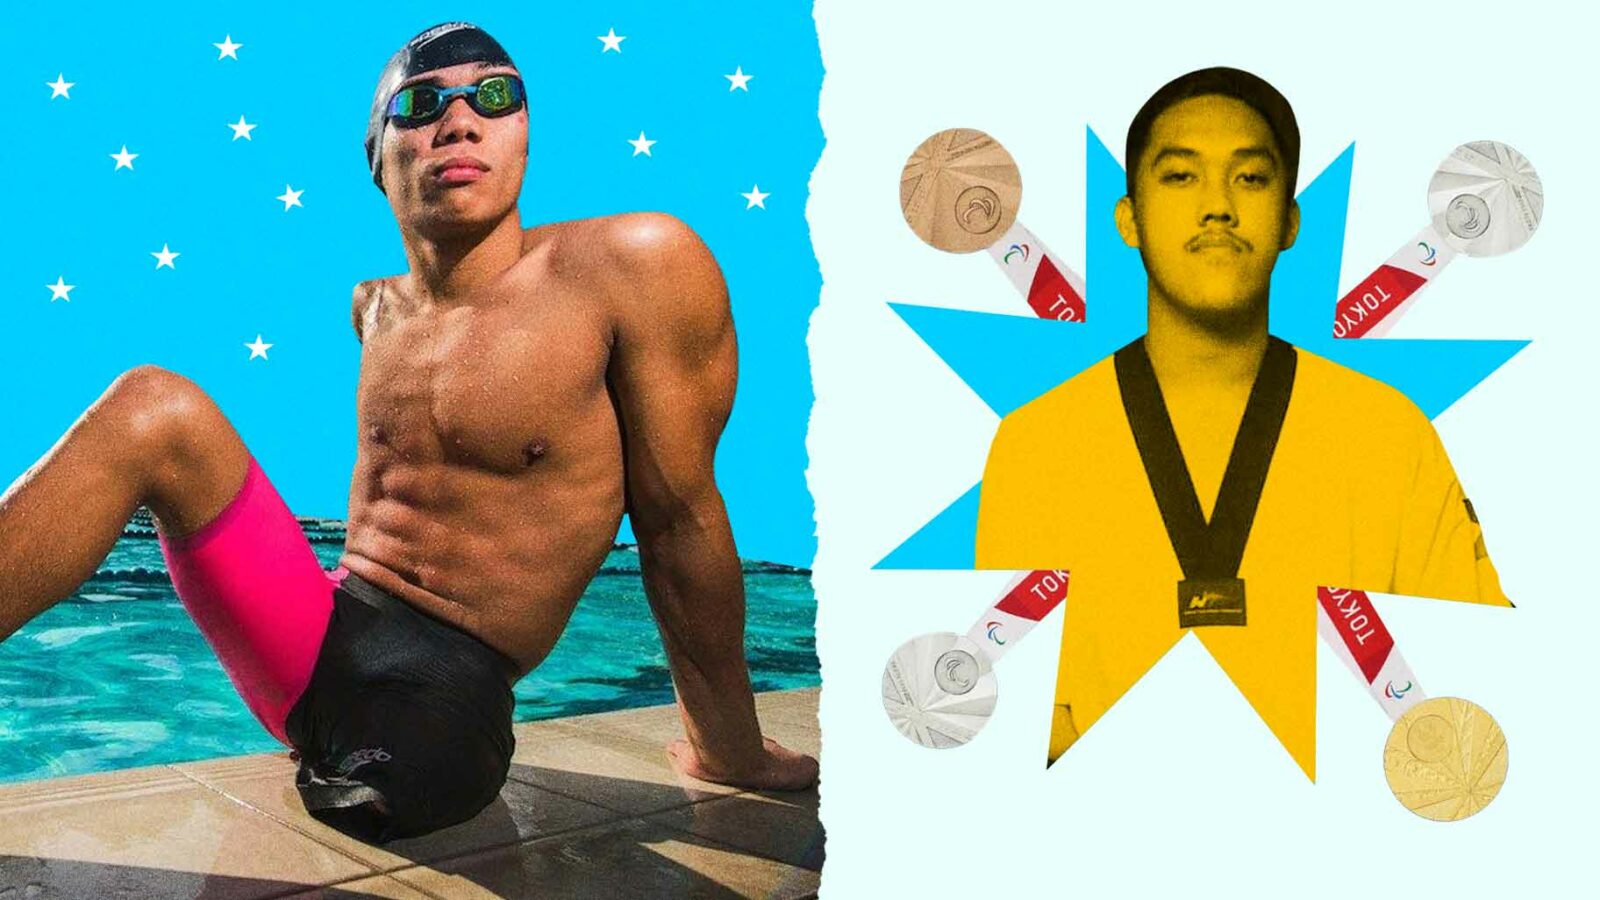 MEET THE SIX FILIPINO ATHLETES REPRESENTING THE PHILIPPINES AT THE TOKYO PARALYMPIC GAMES